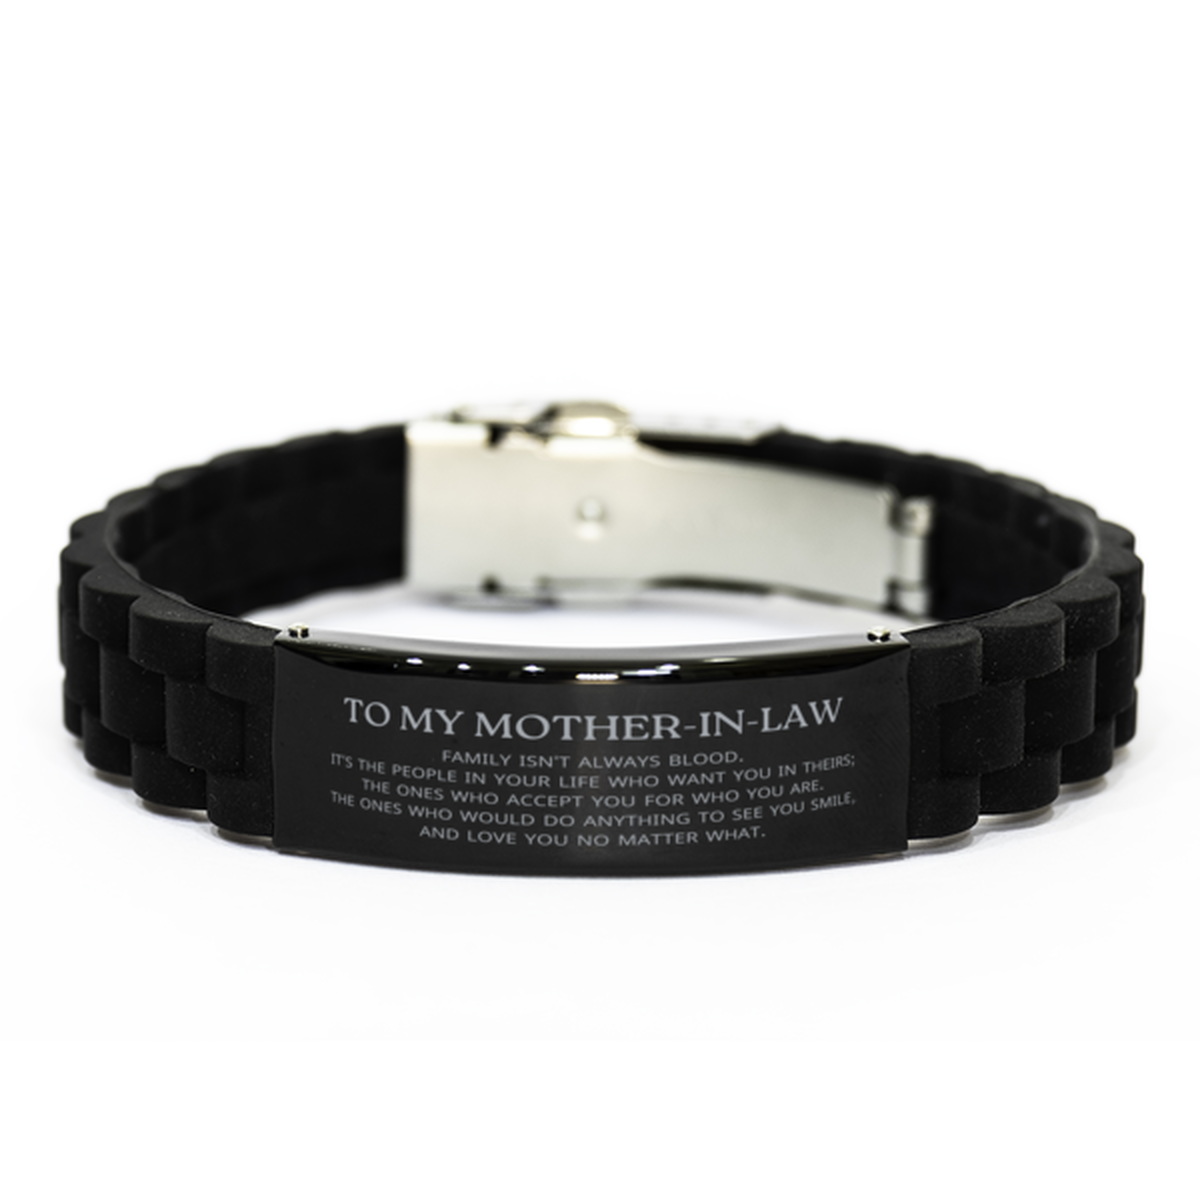 To My Mother-In-Law Gifts, Family isn't always blood, Mother-In-Law Black Glidelock Clasp Bracelet, Birthday Christmas Unique Present For Mother-In-Law